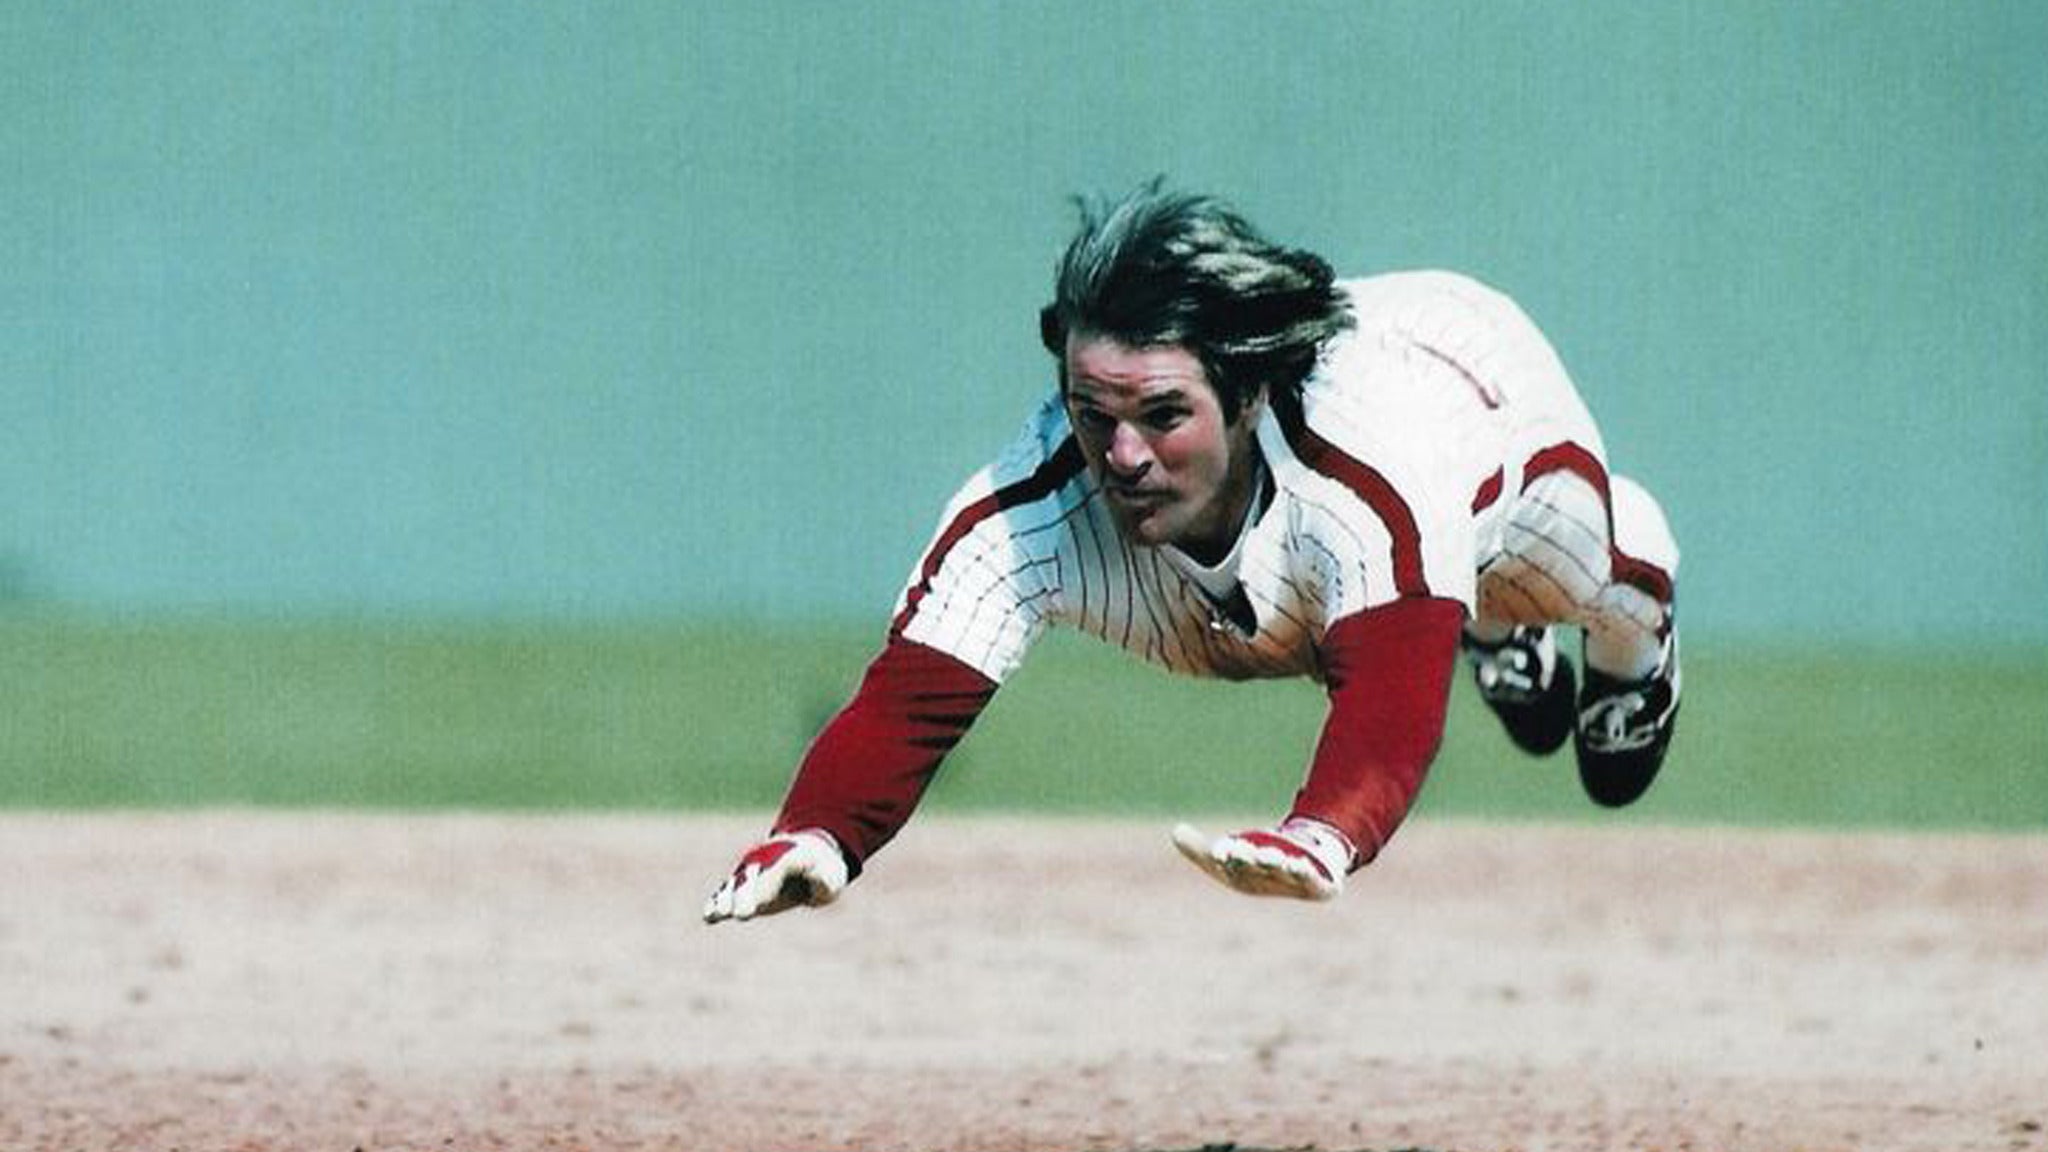 An Evening with Pete Rose Tickets. Single Game Tickets & Schedule